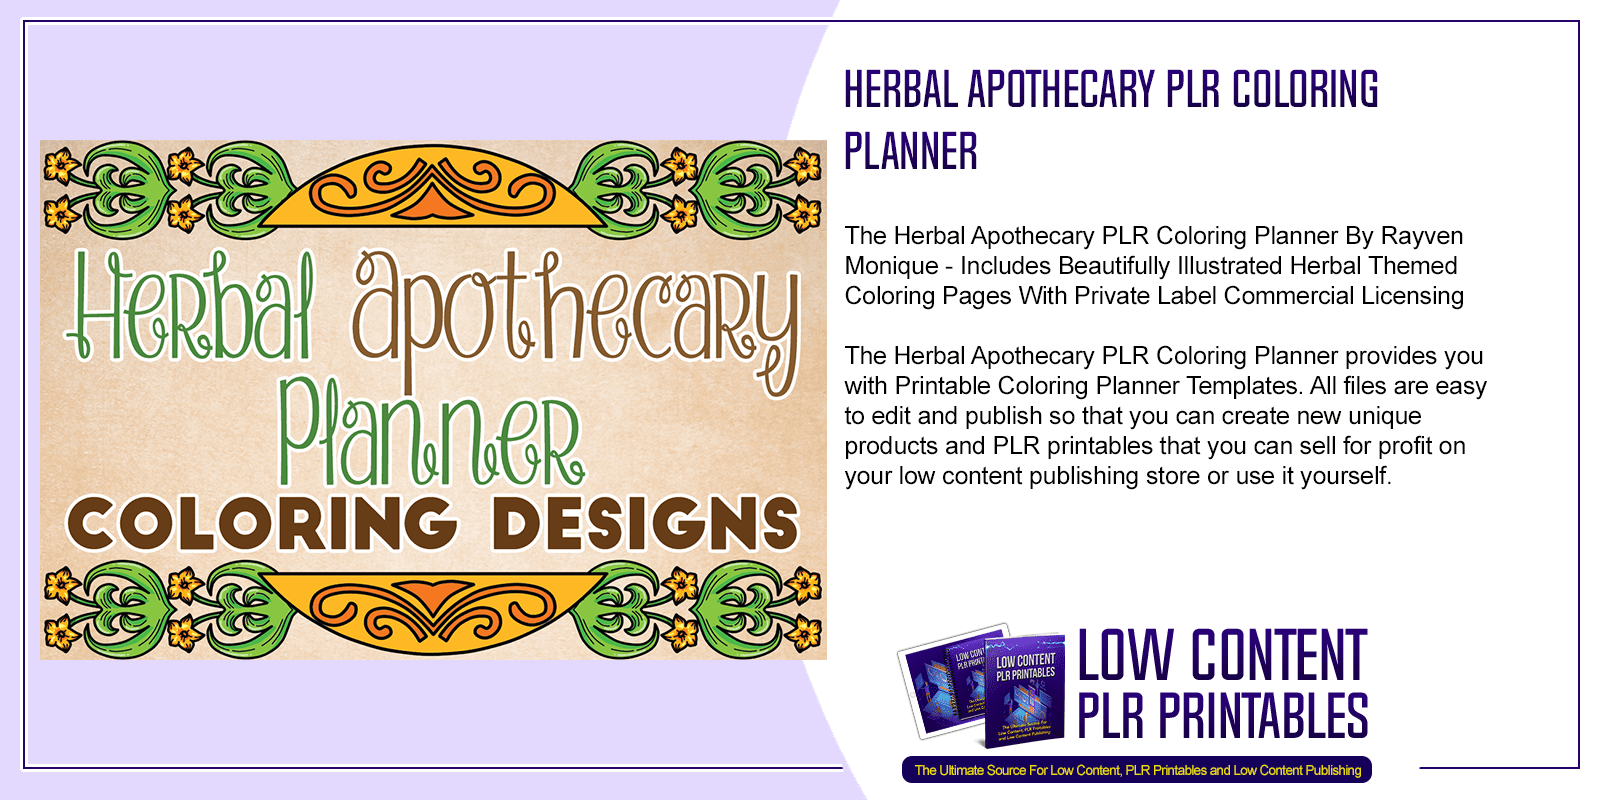 Herbal Apothecary PLR Coloring Planner